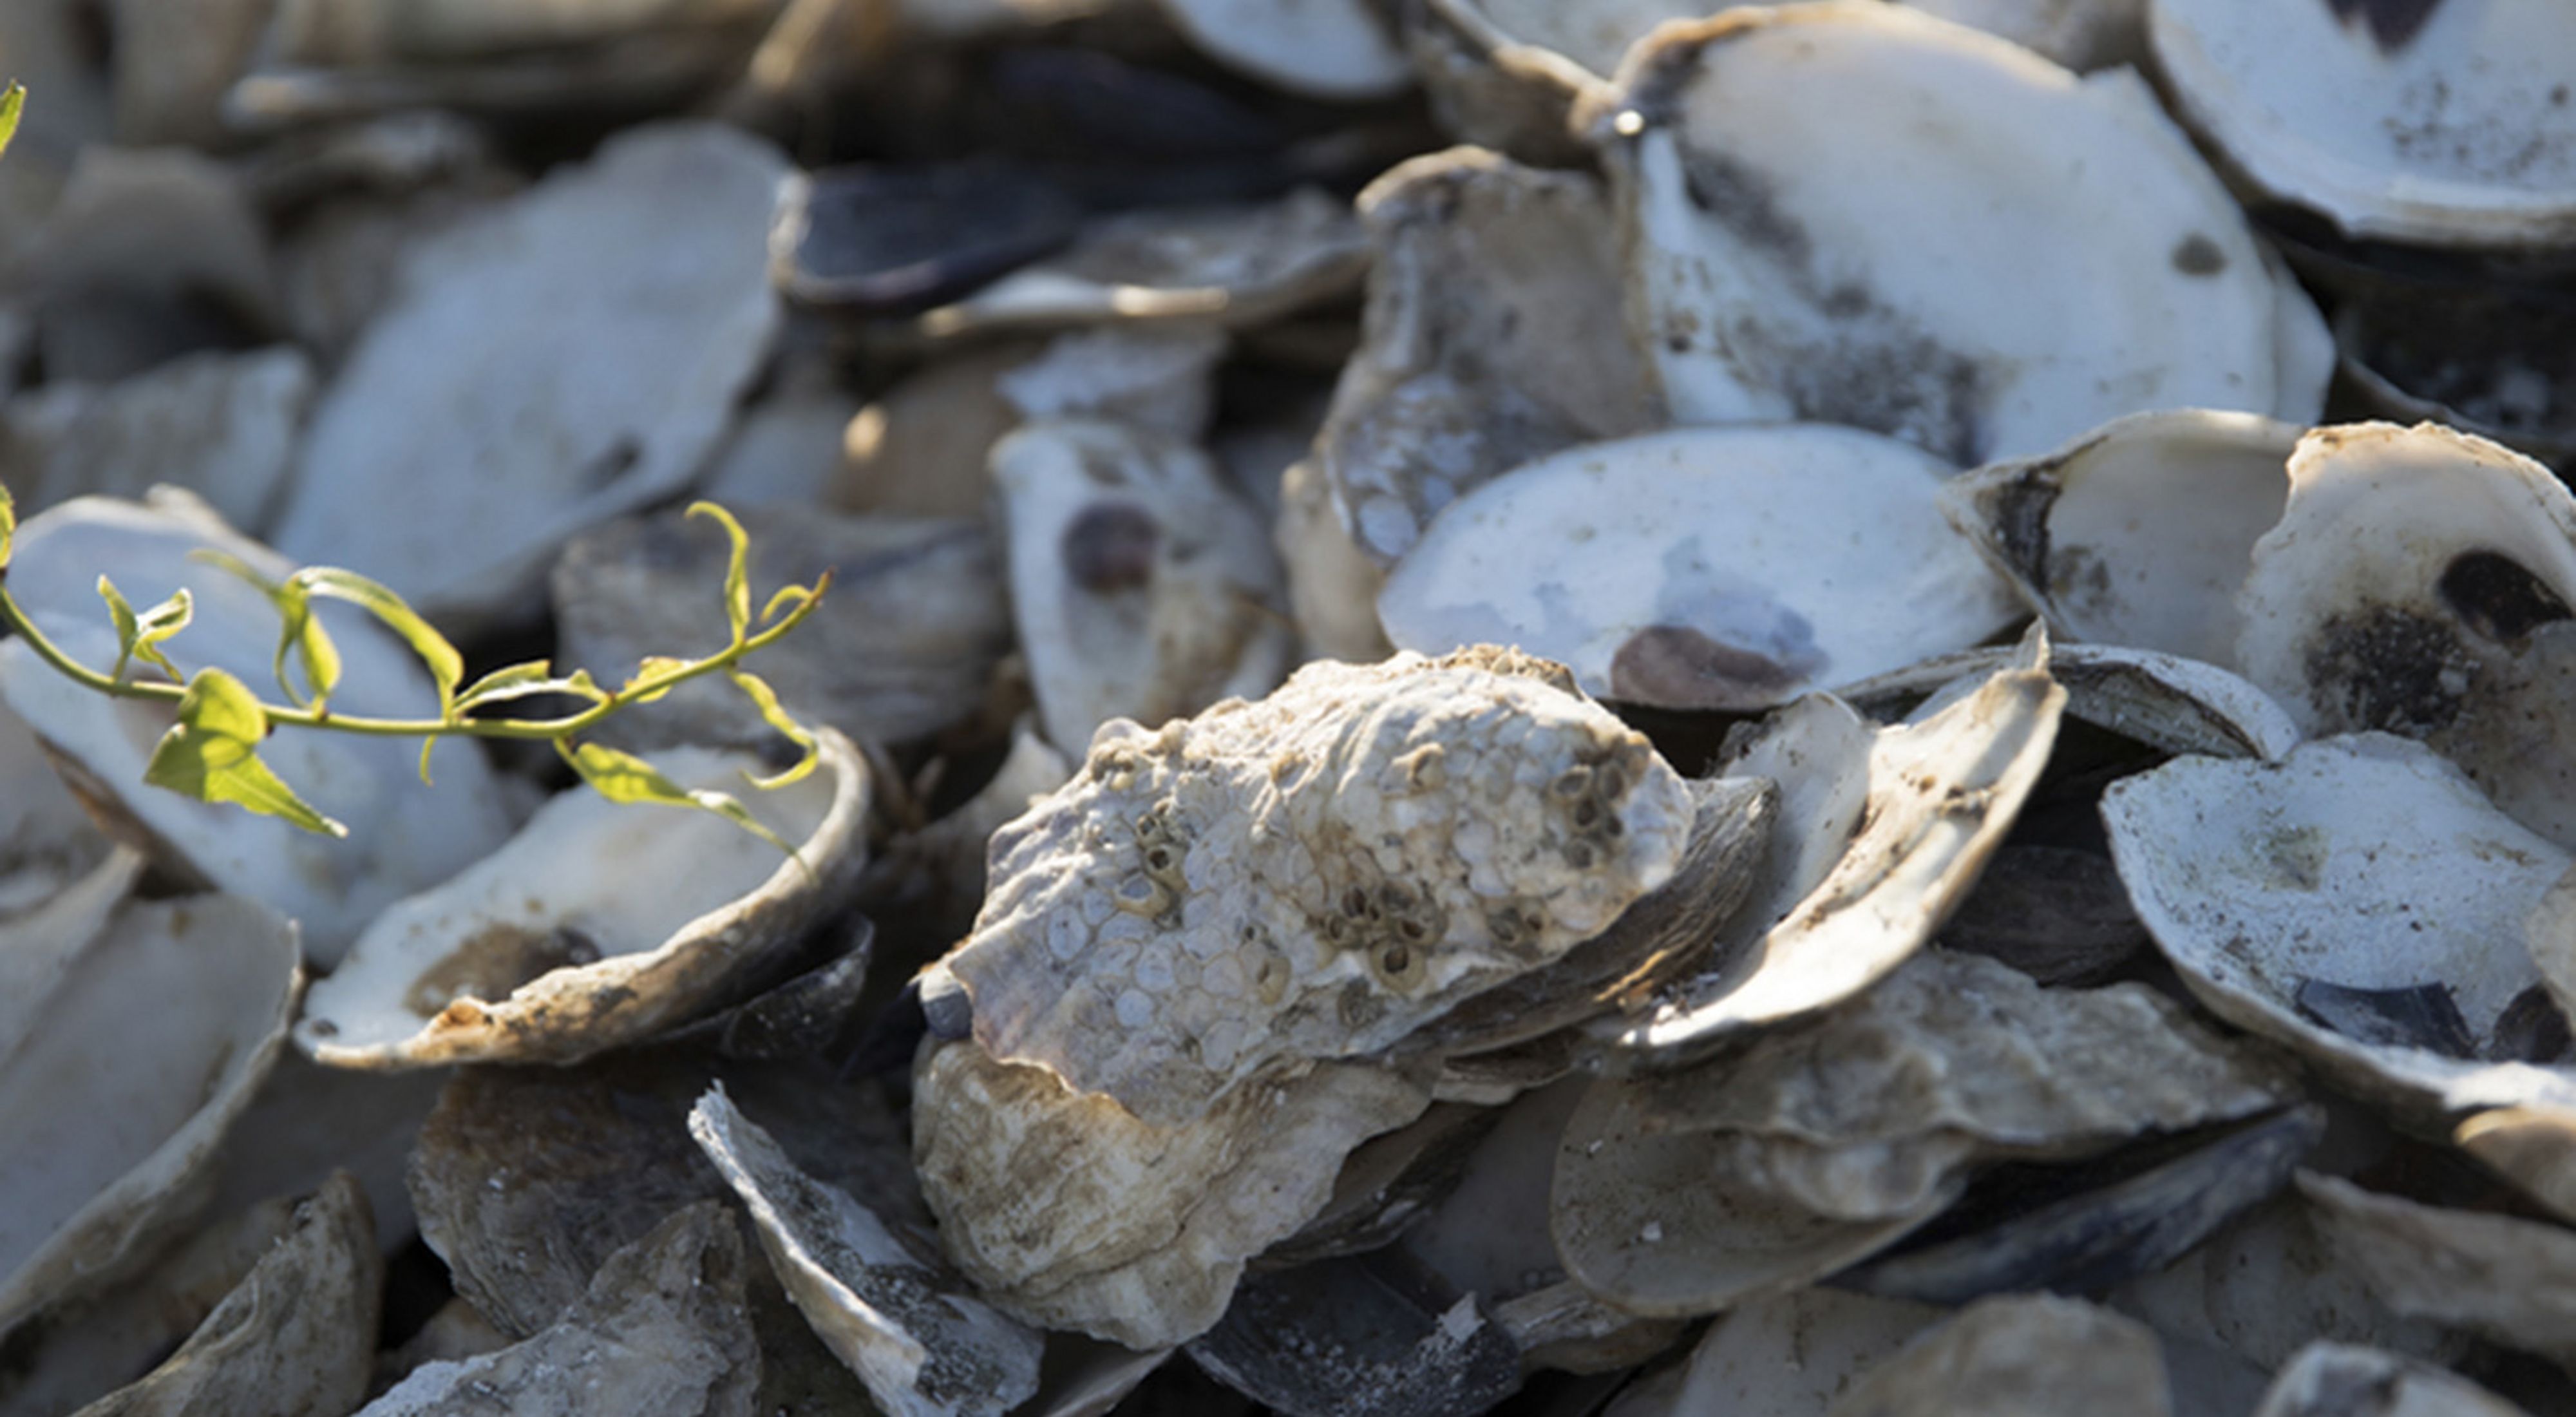 Close up view of a large pile of loose oyster shells. The shell halves are massed into a pile, some showing the smooth white interior surface with a dark round mark where the oyster was attached.